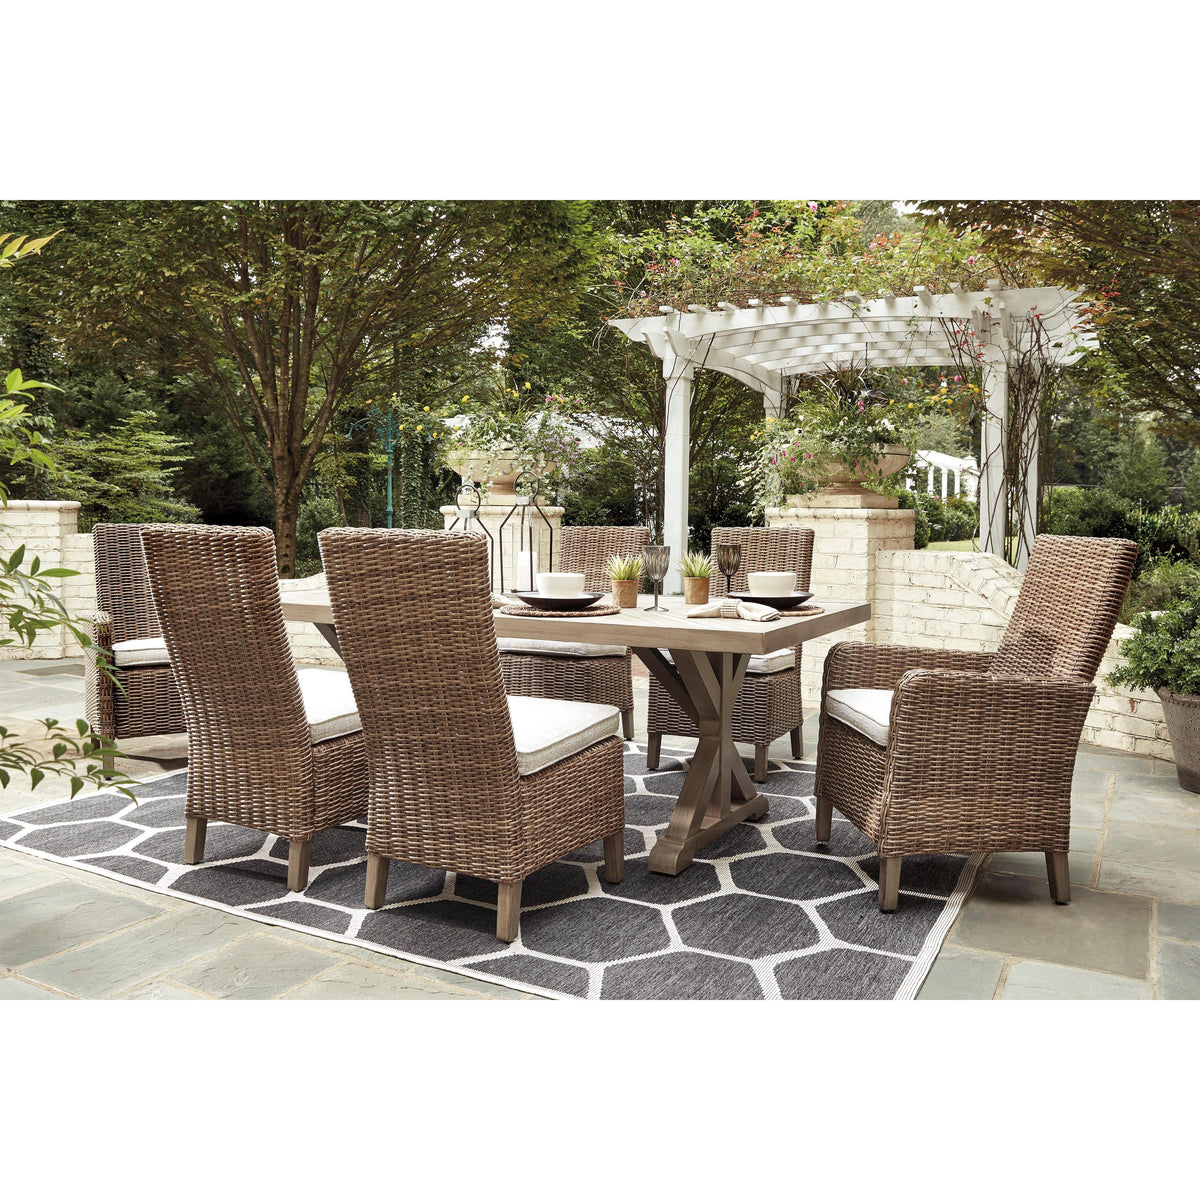 Signature Design by Ashley Beachcroft P791 7 pc Outdoor Dining Set